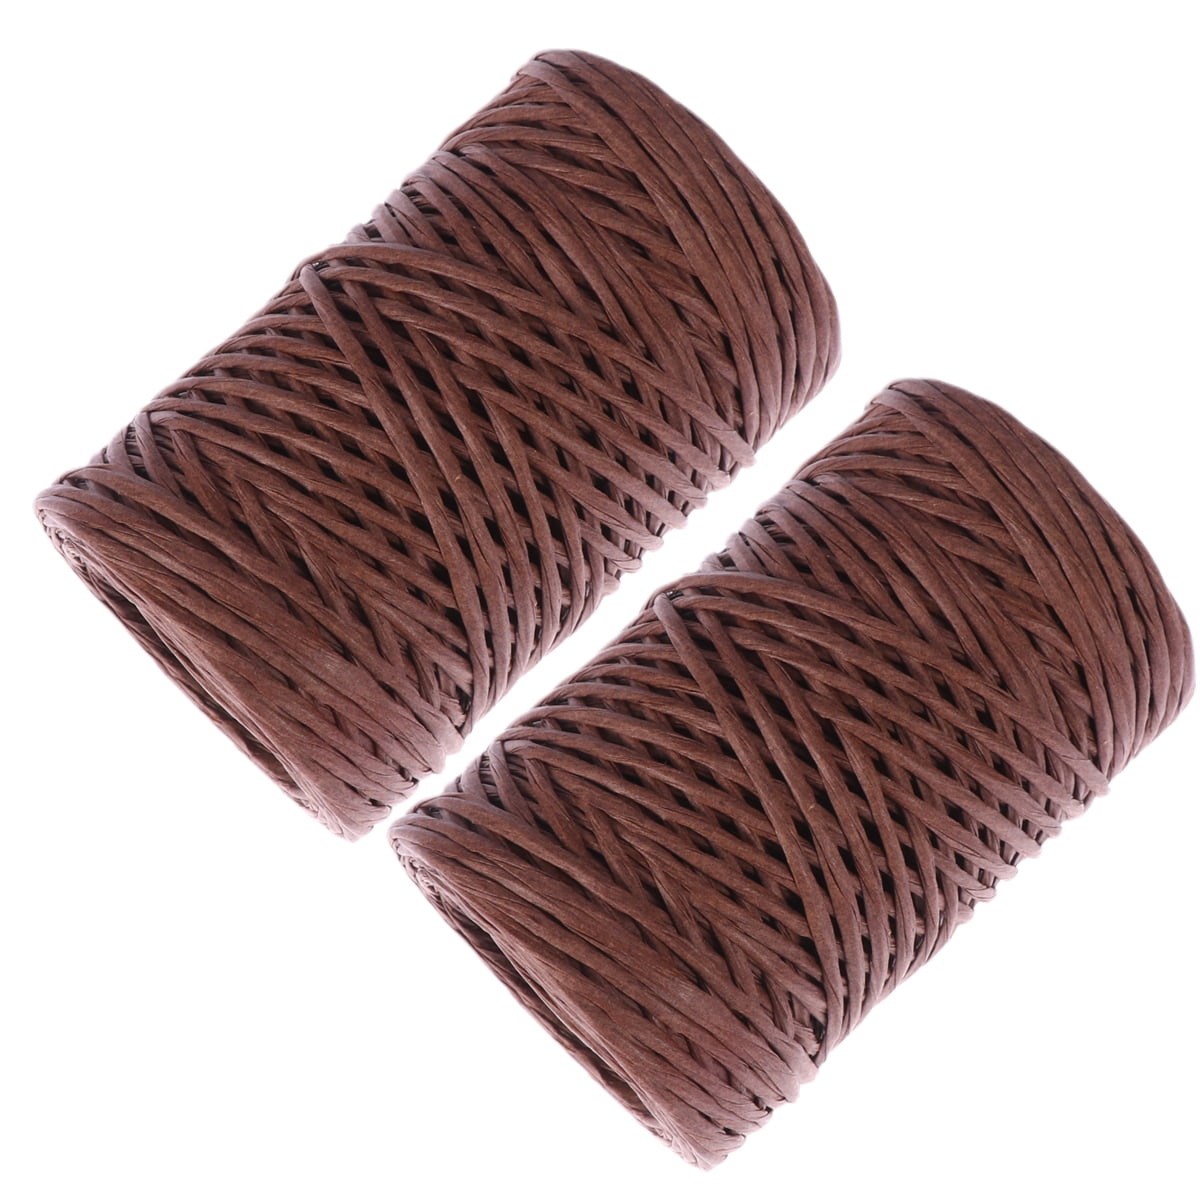 OUNONA 2pcs Braided Paper Rope with Iron Wire Woven Paper Rattan